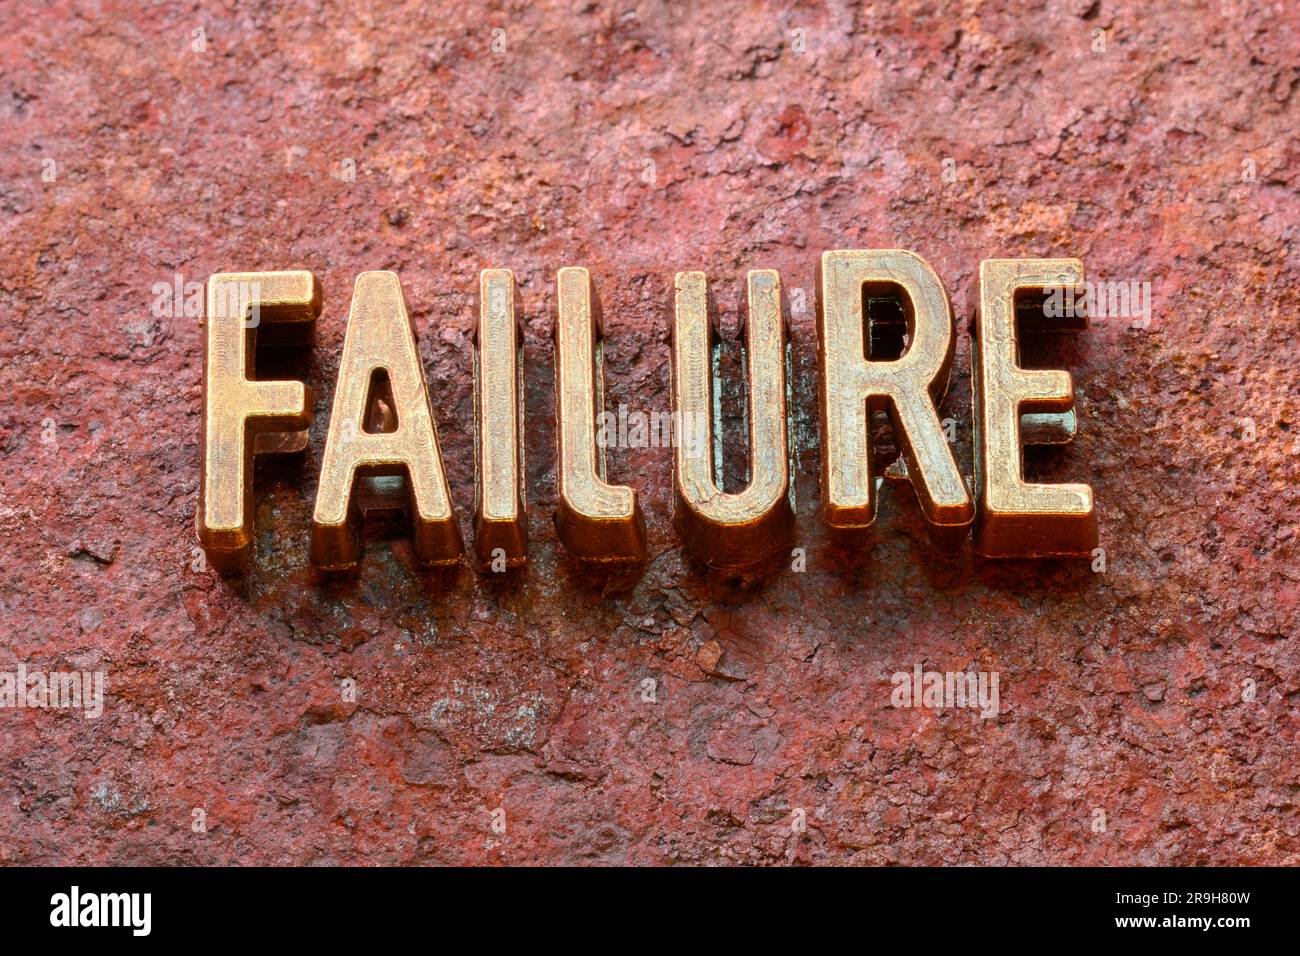 failure word made from metallic letters on red rusty surface Stock Photo